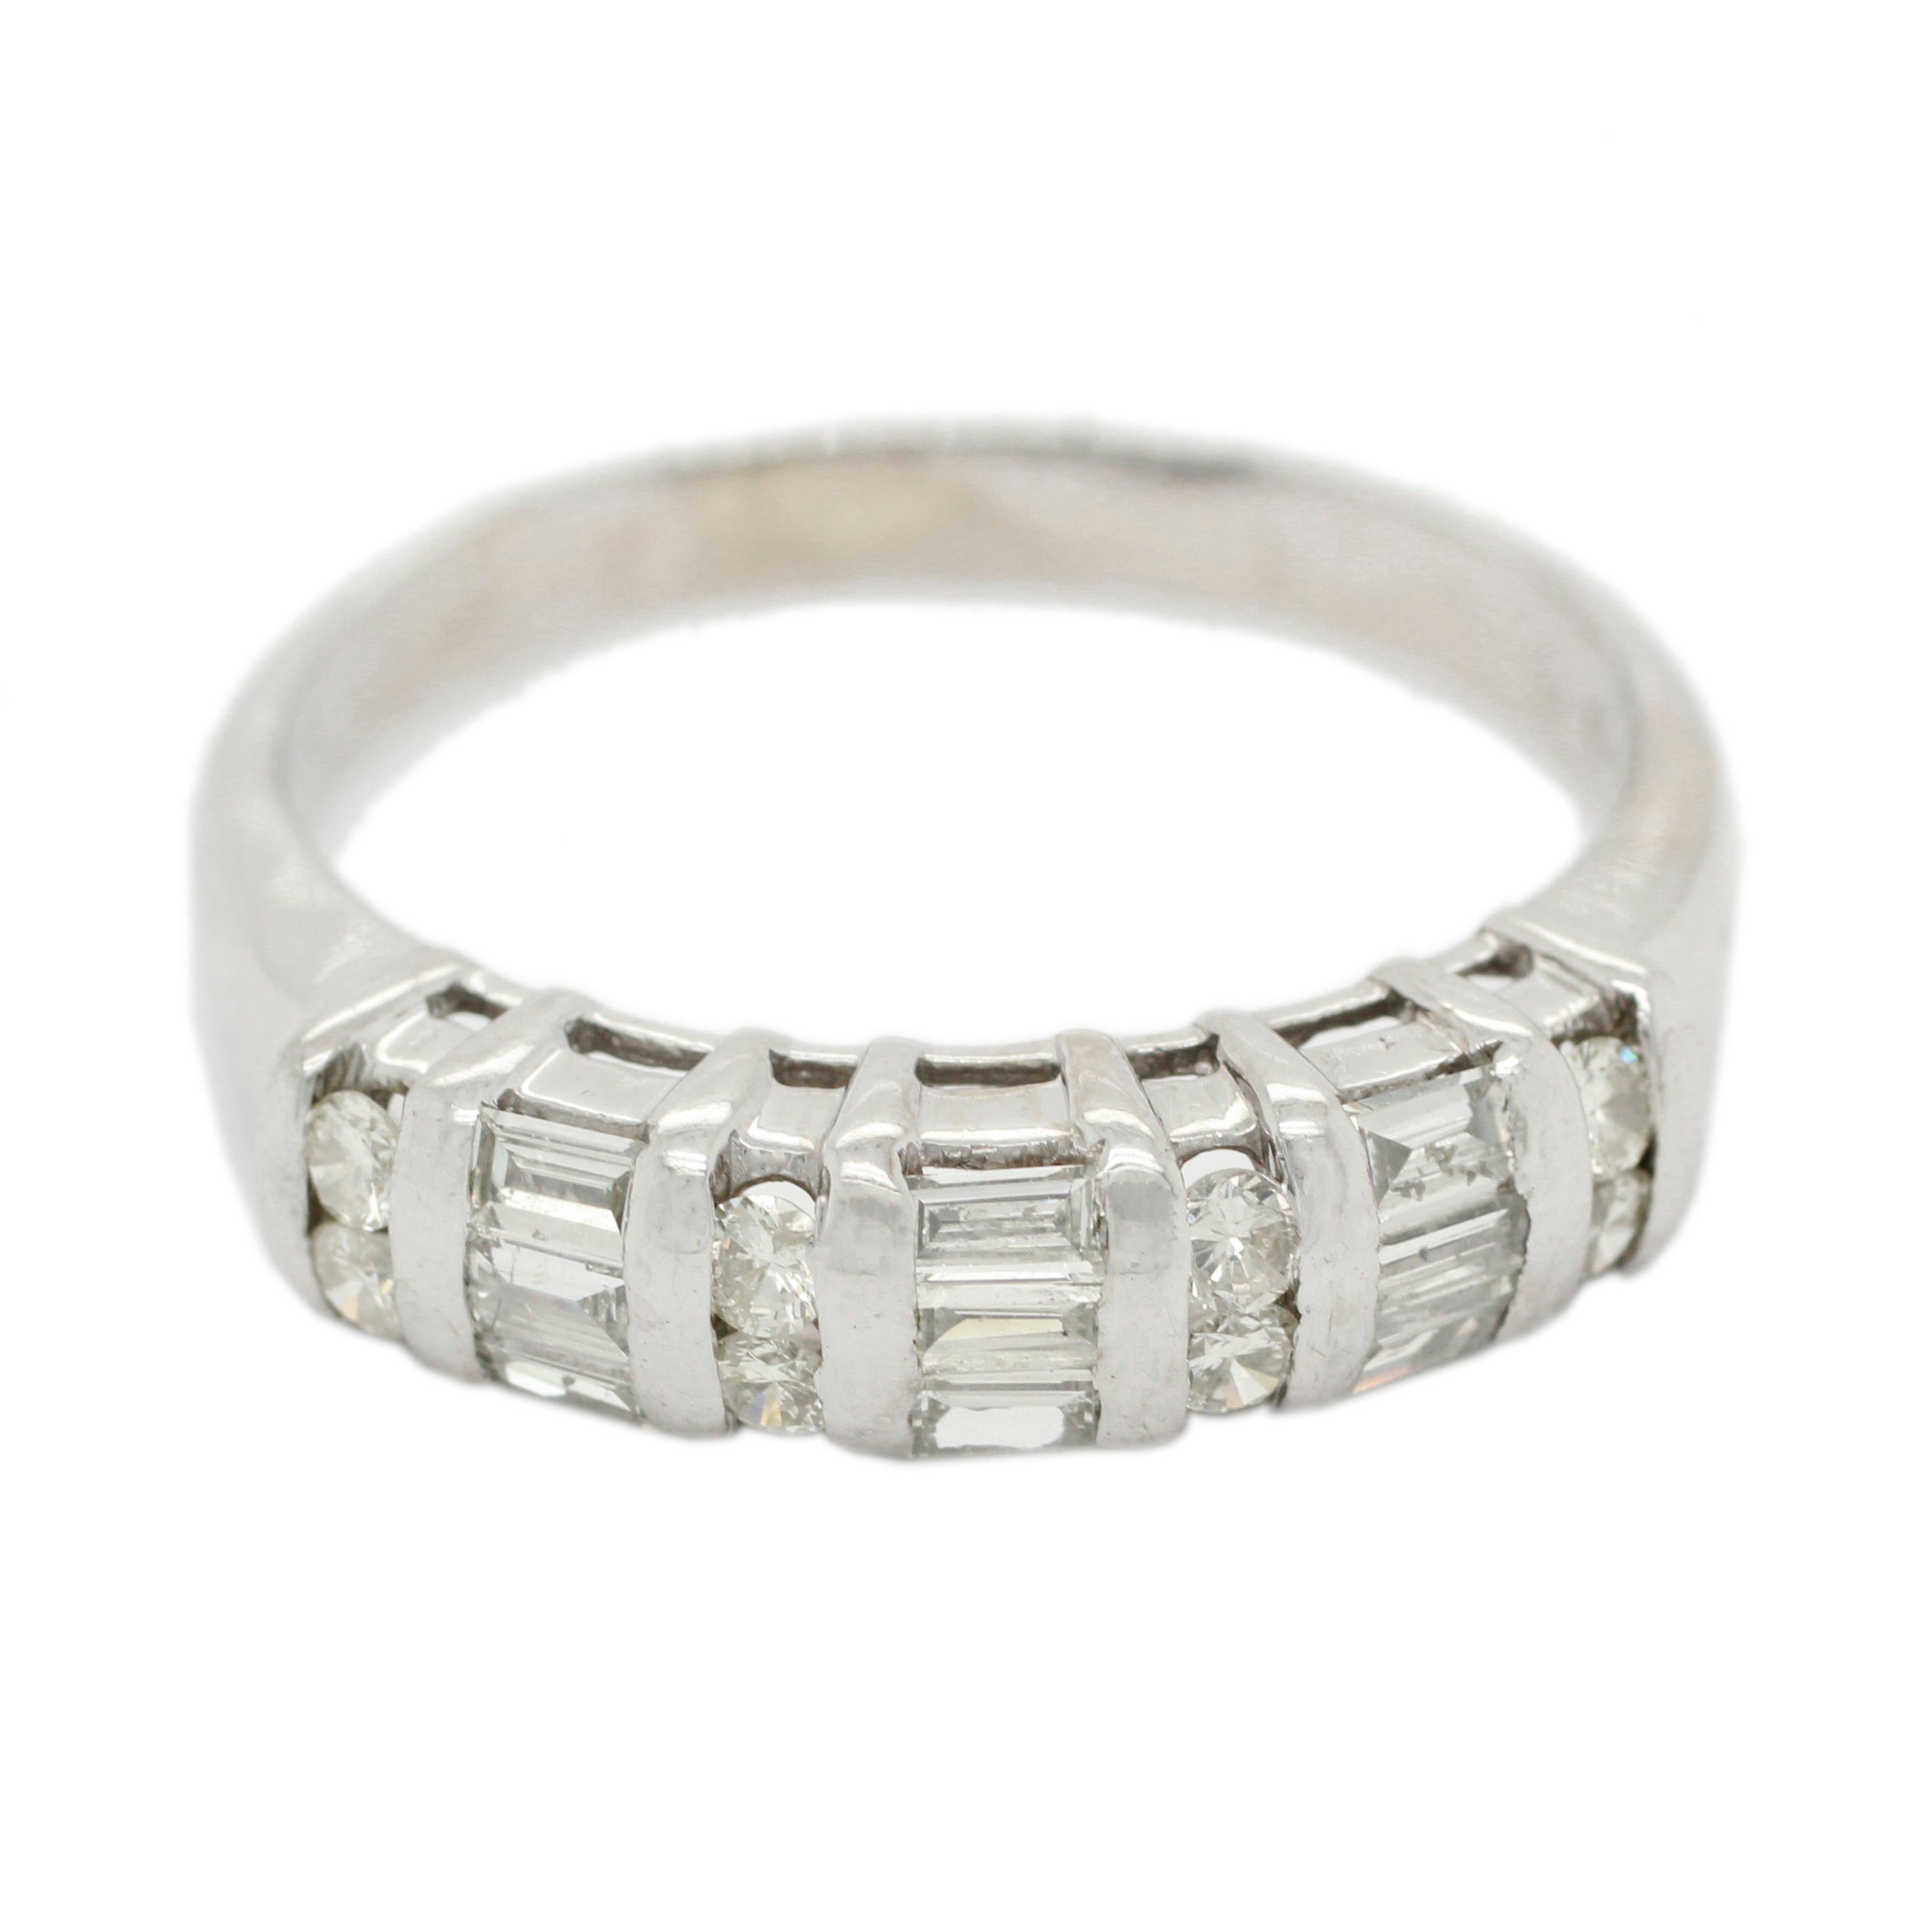 Vintage Round & Baguette Diamond Band Ring 0.40ctw in 14k White Gold | Size 9.25